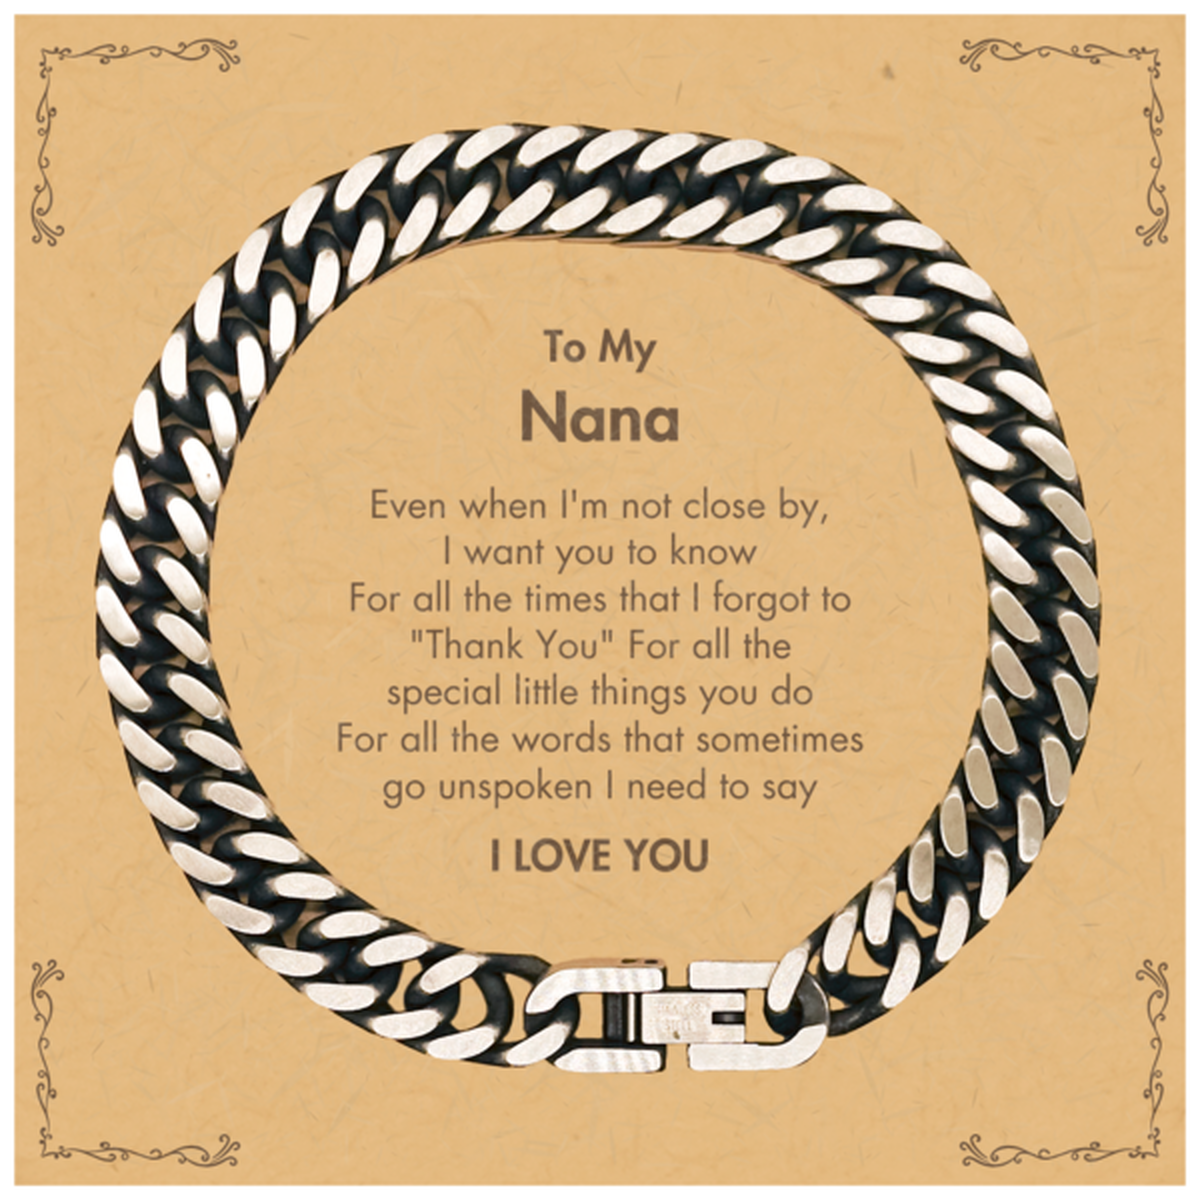 Thank You Gifts for Nana, Keepsake Cuban Link Chain Bracelet Gifts for Nana Birthday Mother's day Father's Day Nana For all the words That sometimes go unspoken I need to say I LOVE YOU